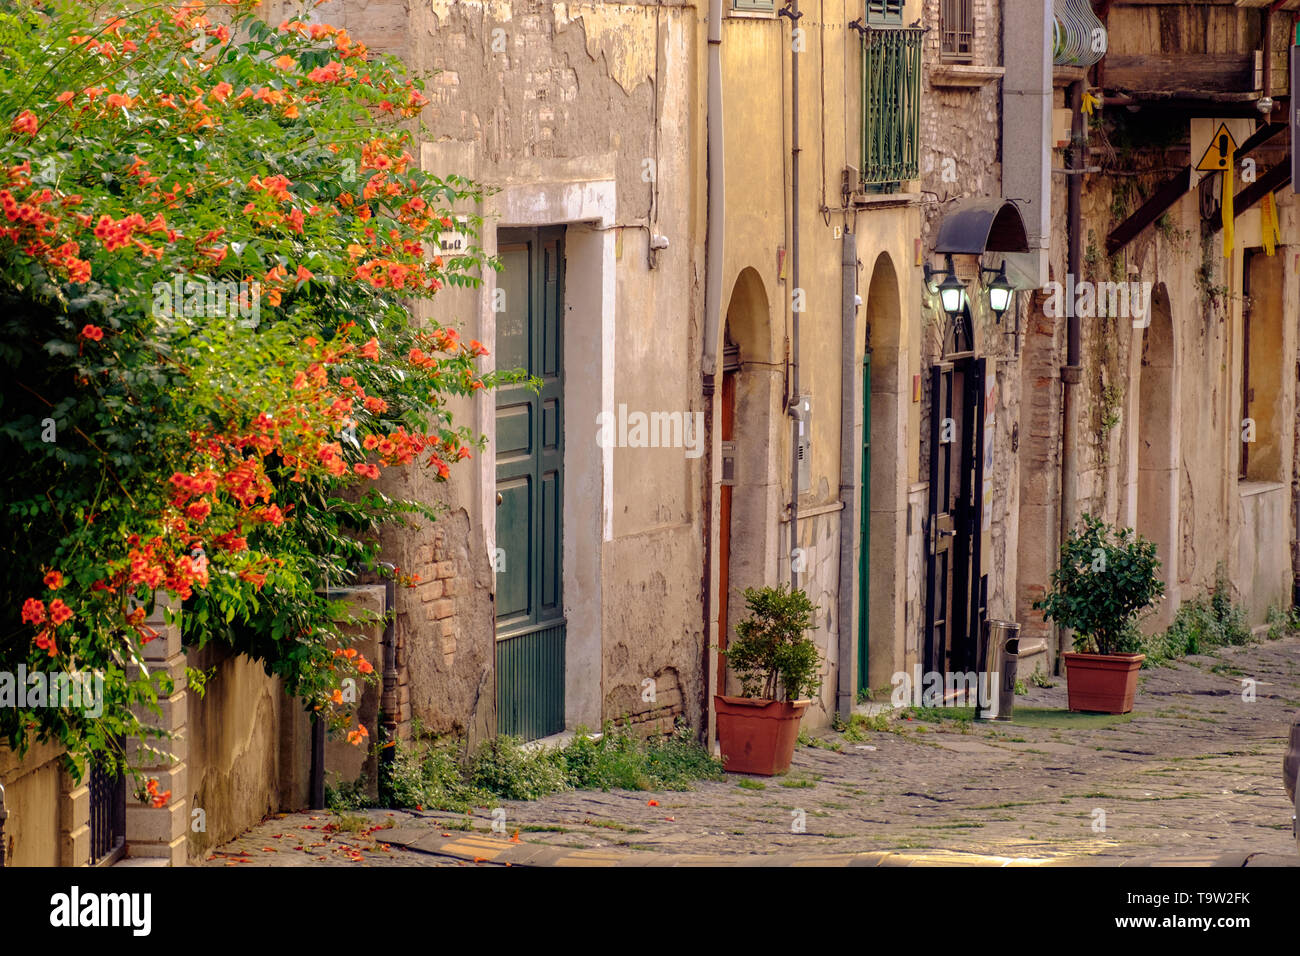 An alley shows the character of historical Benevento. Ancient houses and flowery plants give this alley an authentic personality. Stock Photo